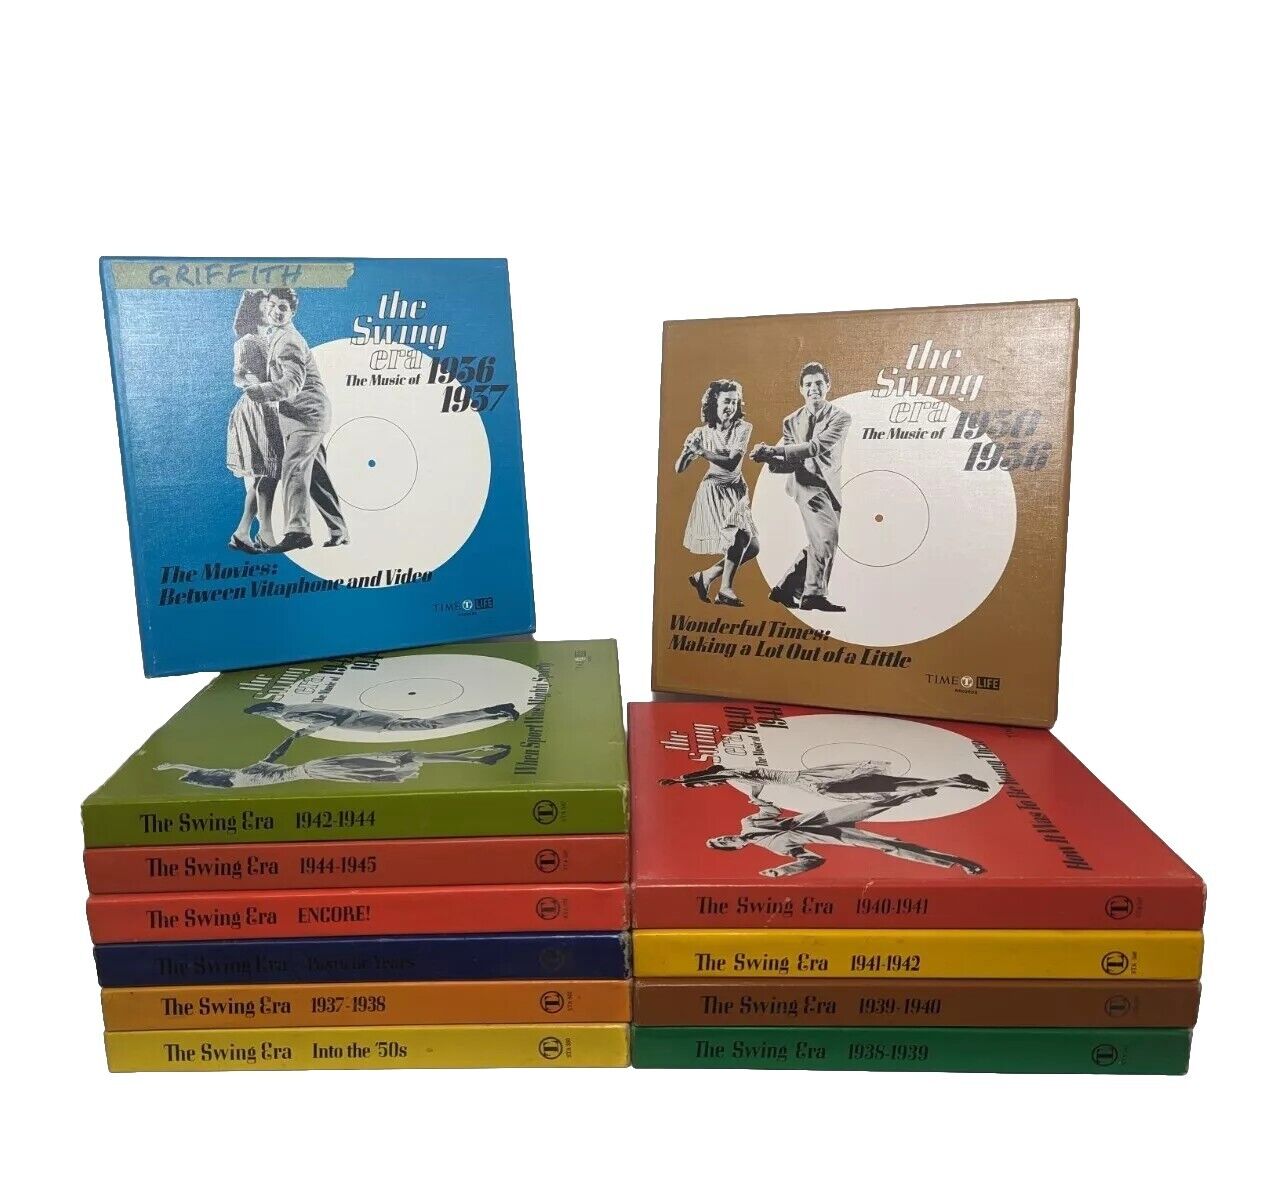 The Swing Era - 12 LP Record Album Box Sets - Time Life Records With Books